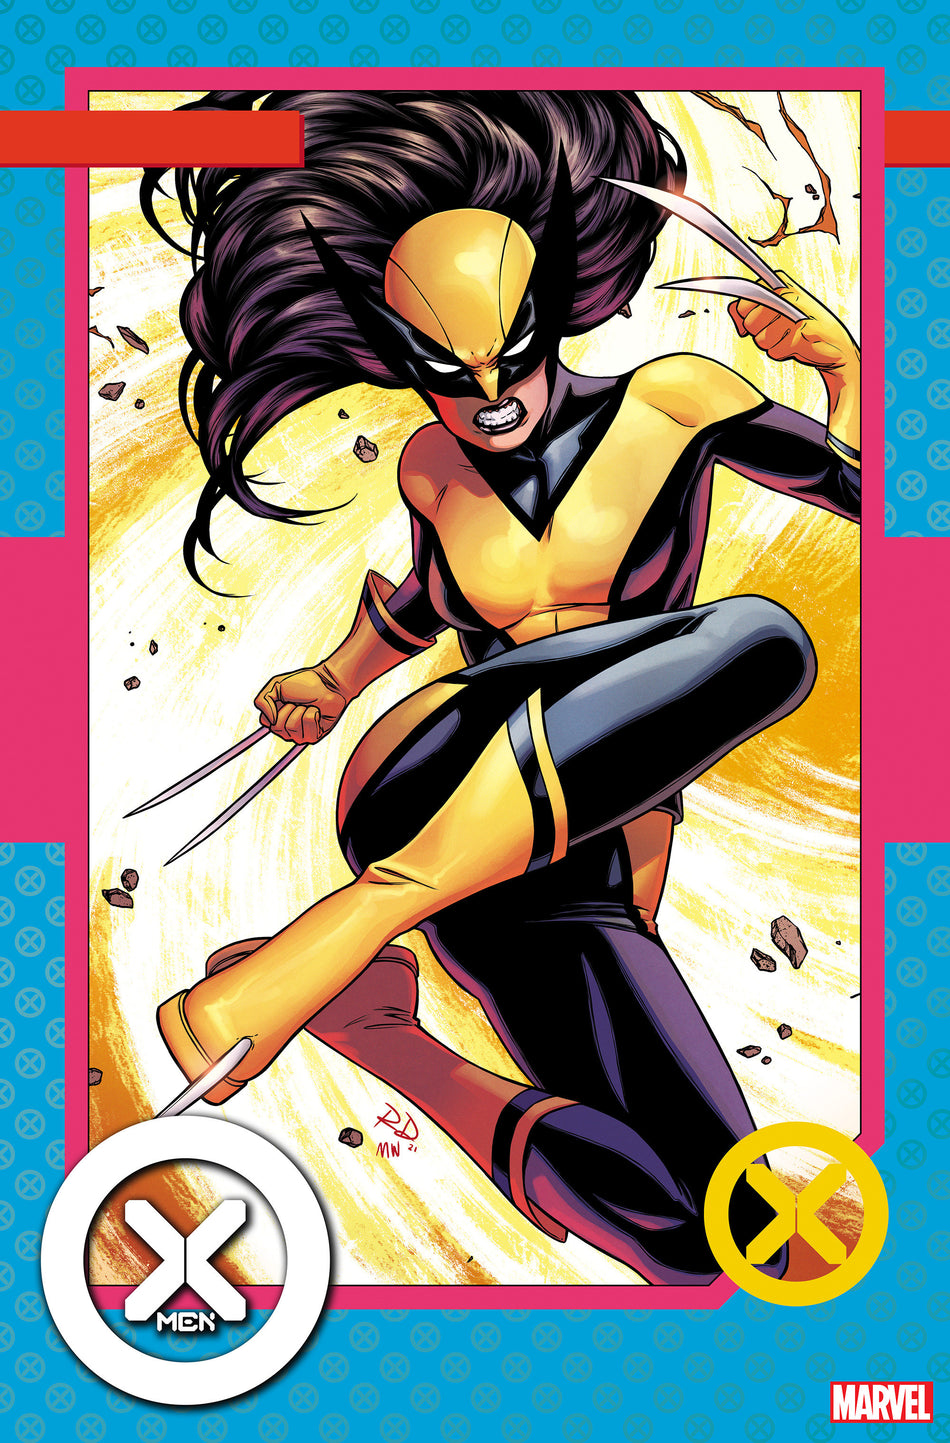 Image of X-Men 8 Dauterman Trading Card Variant comic sold by Stronghold Collectibles.